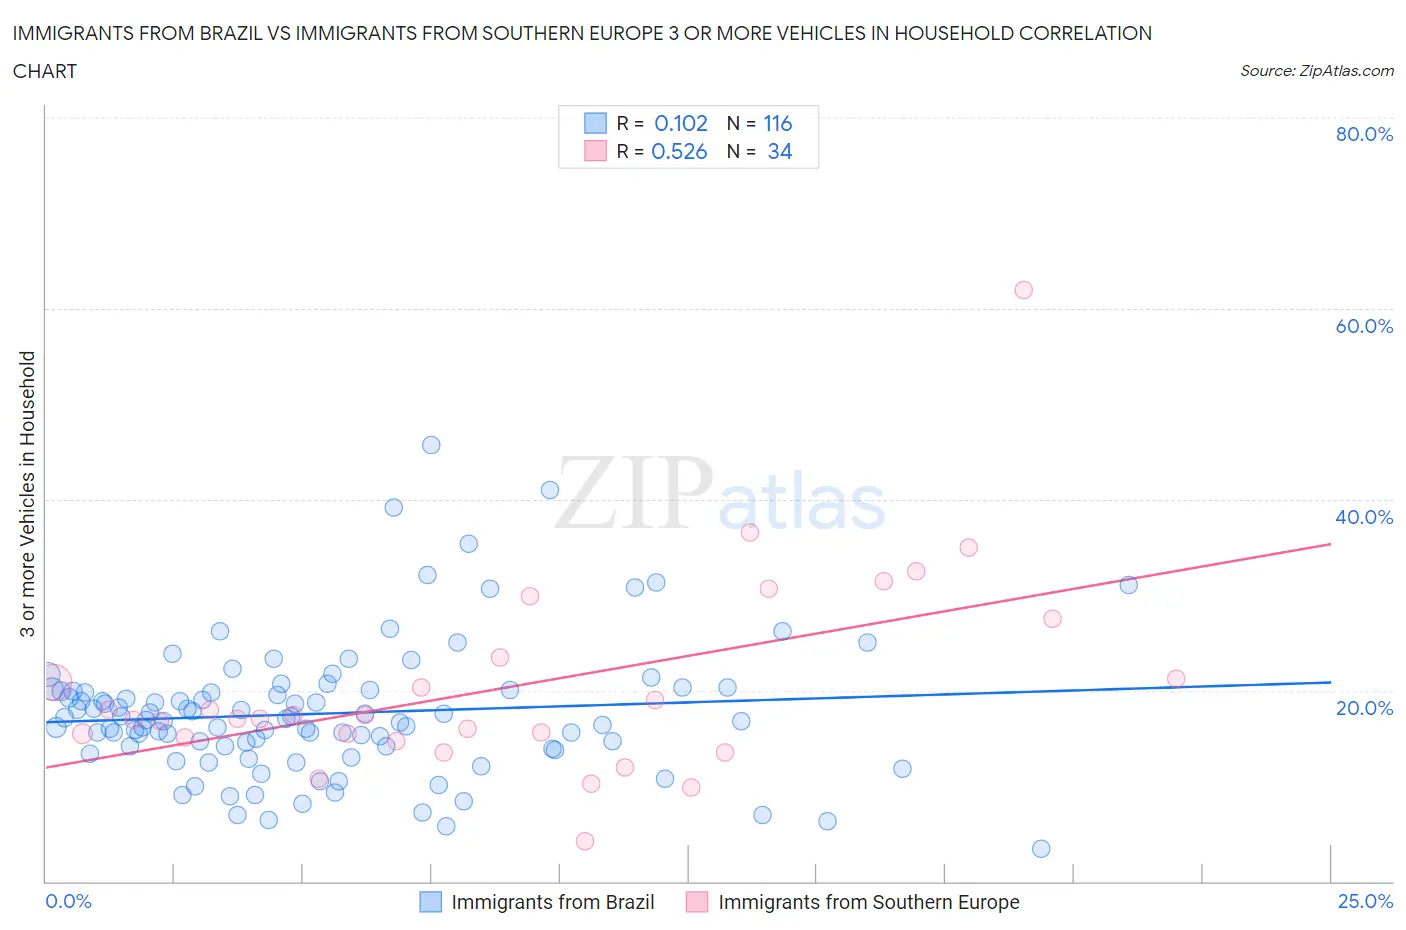 Immigrants from Brazil vs Immigrants from Southern Europe 3 or more Vehicles in Household